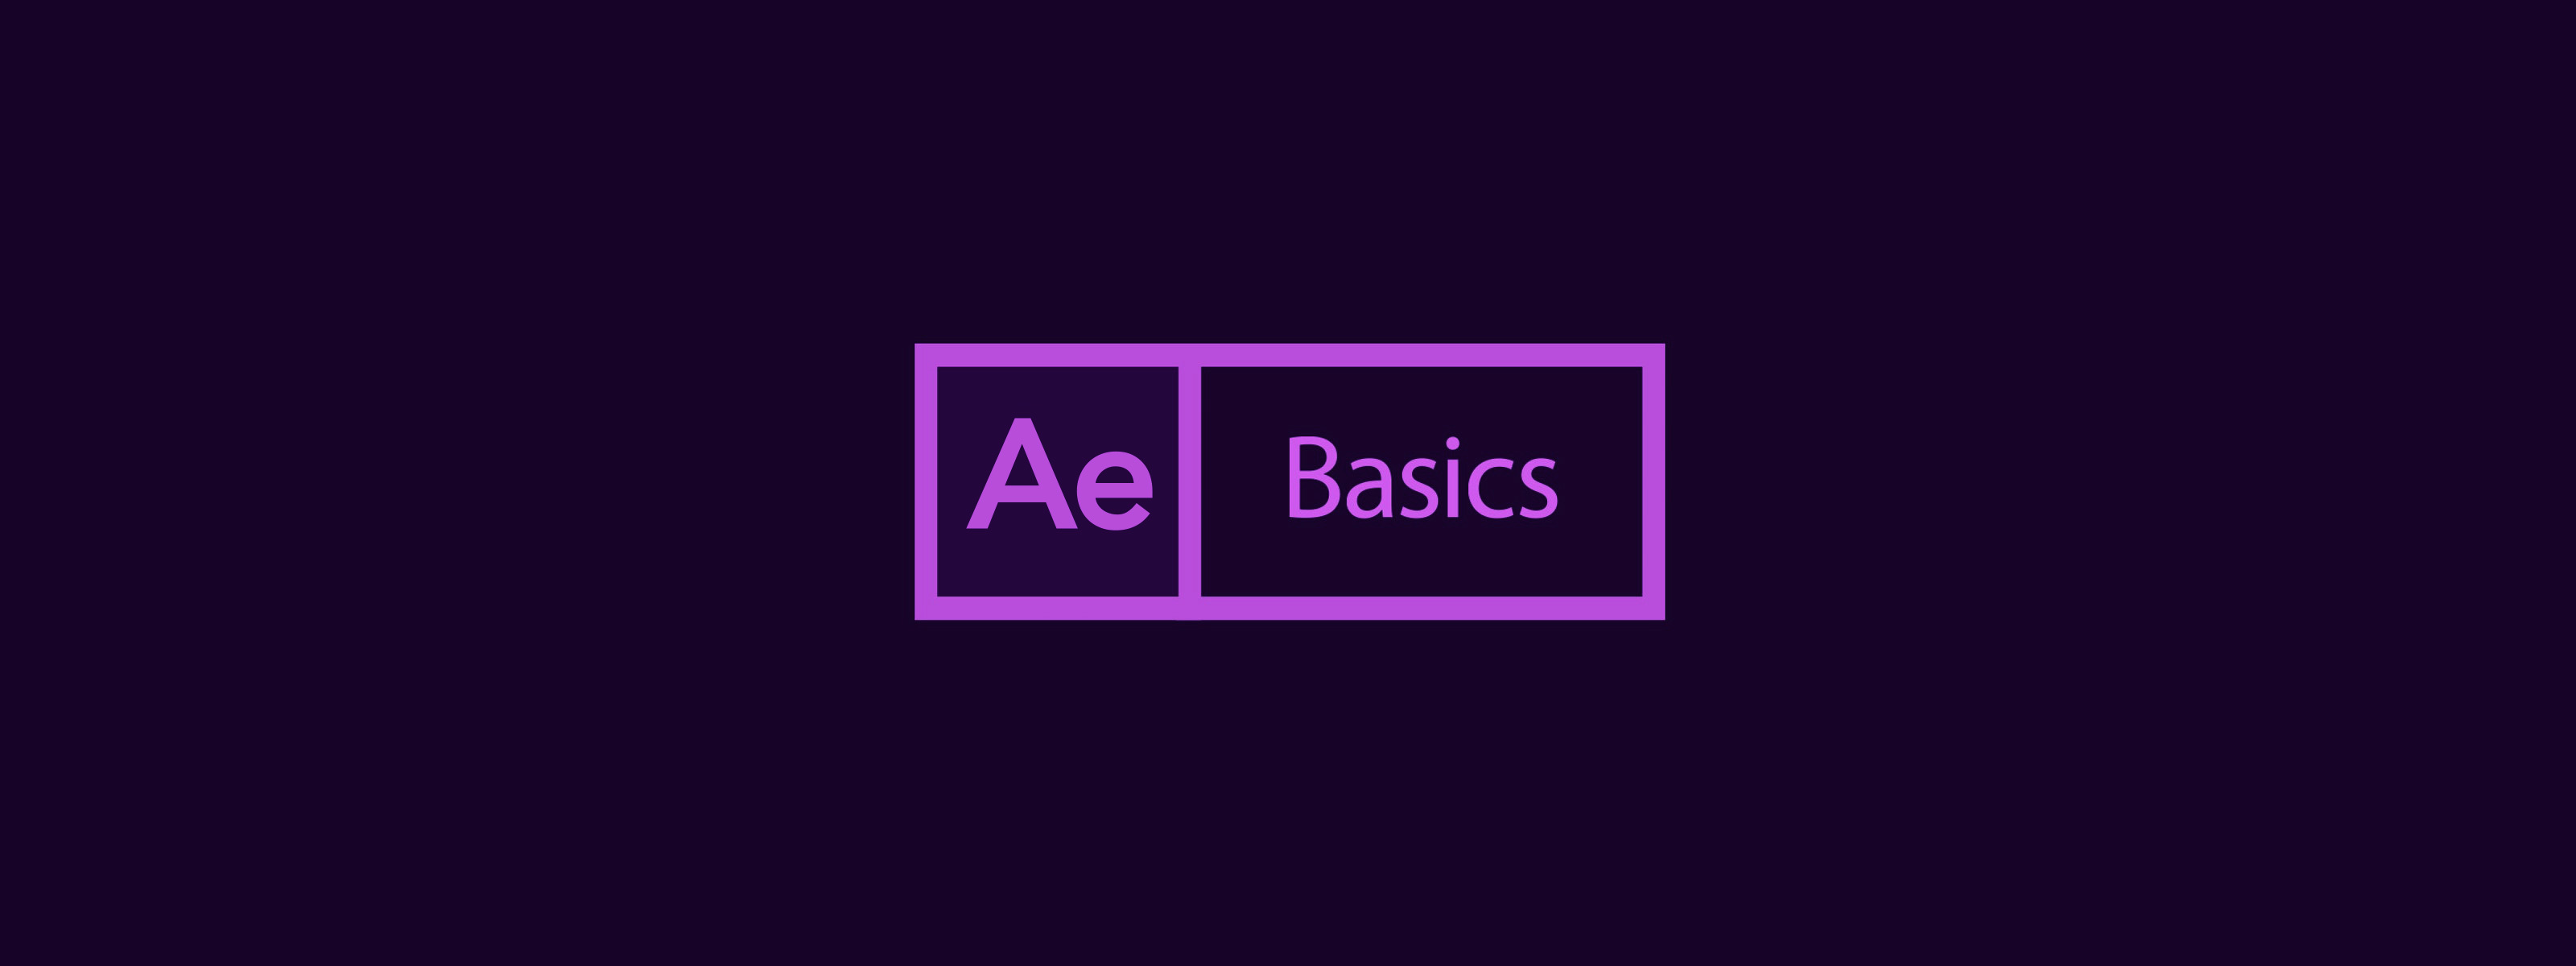 after effects tutorial for beginners pdf